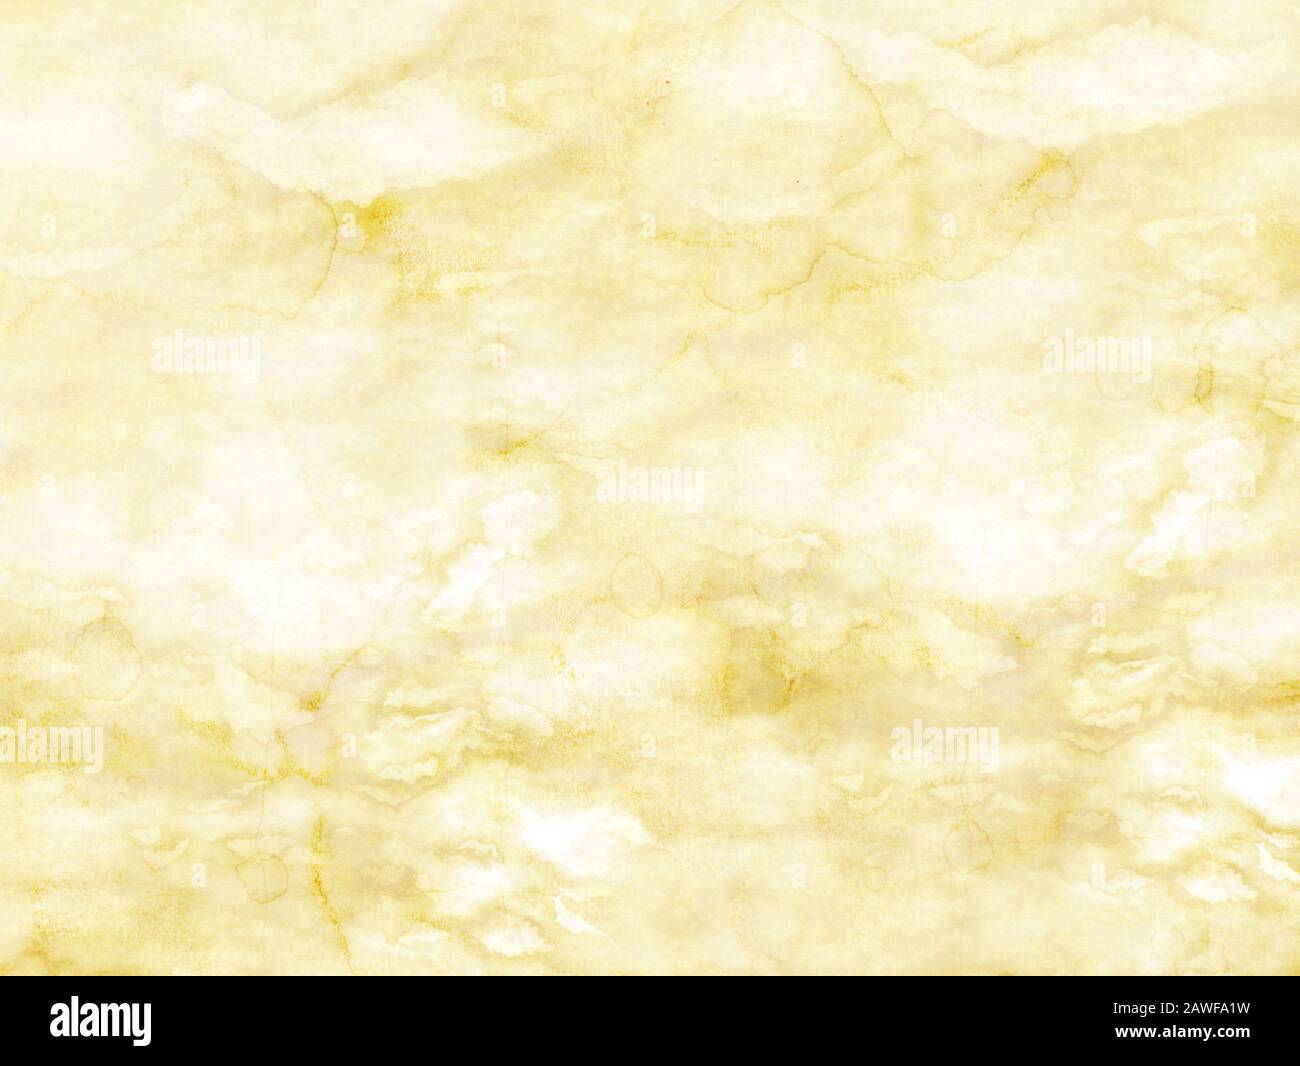 Old paper texture with irregular stains. Monochromatic background. Stock Photo